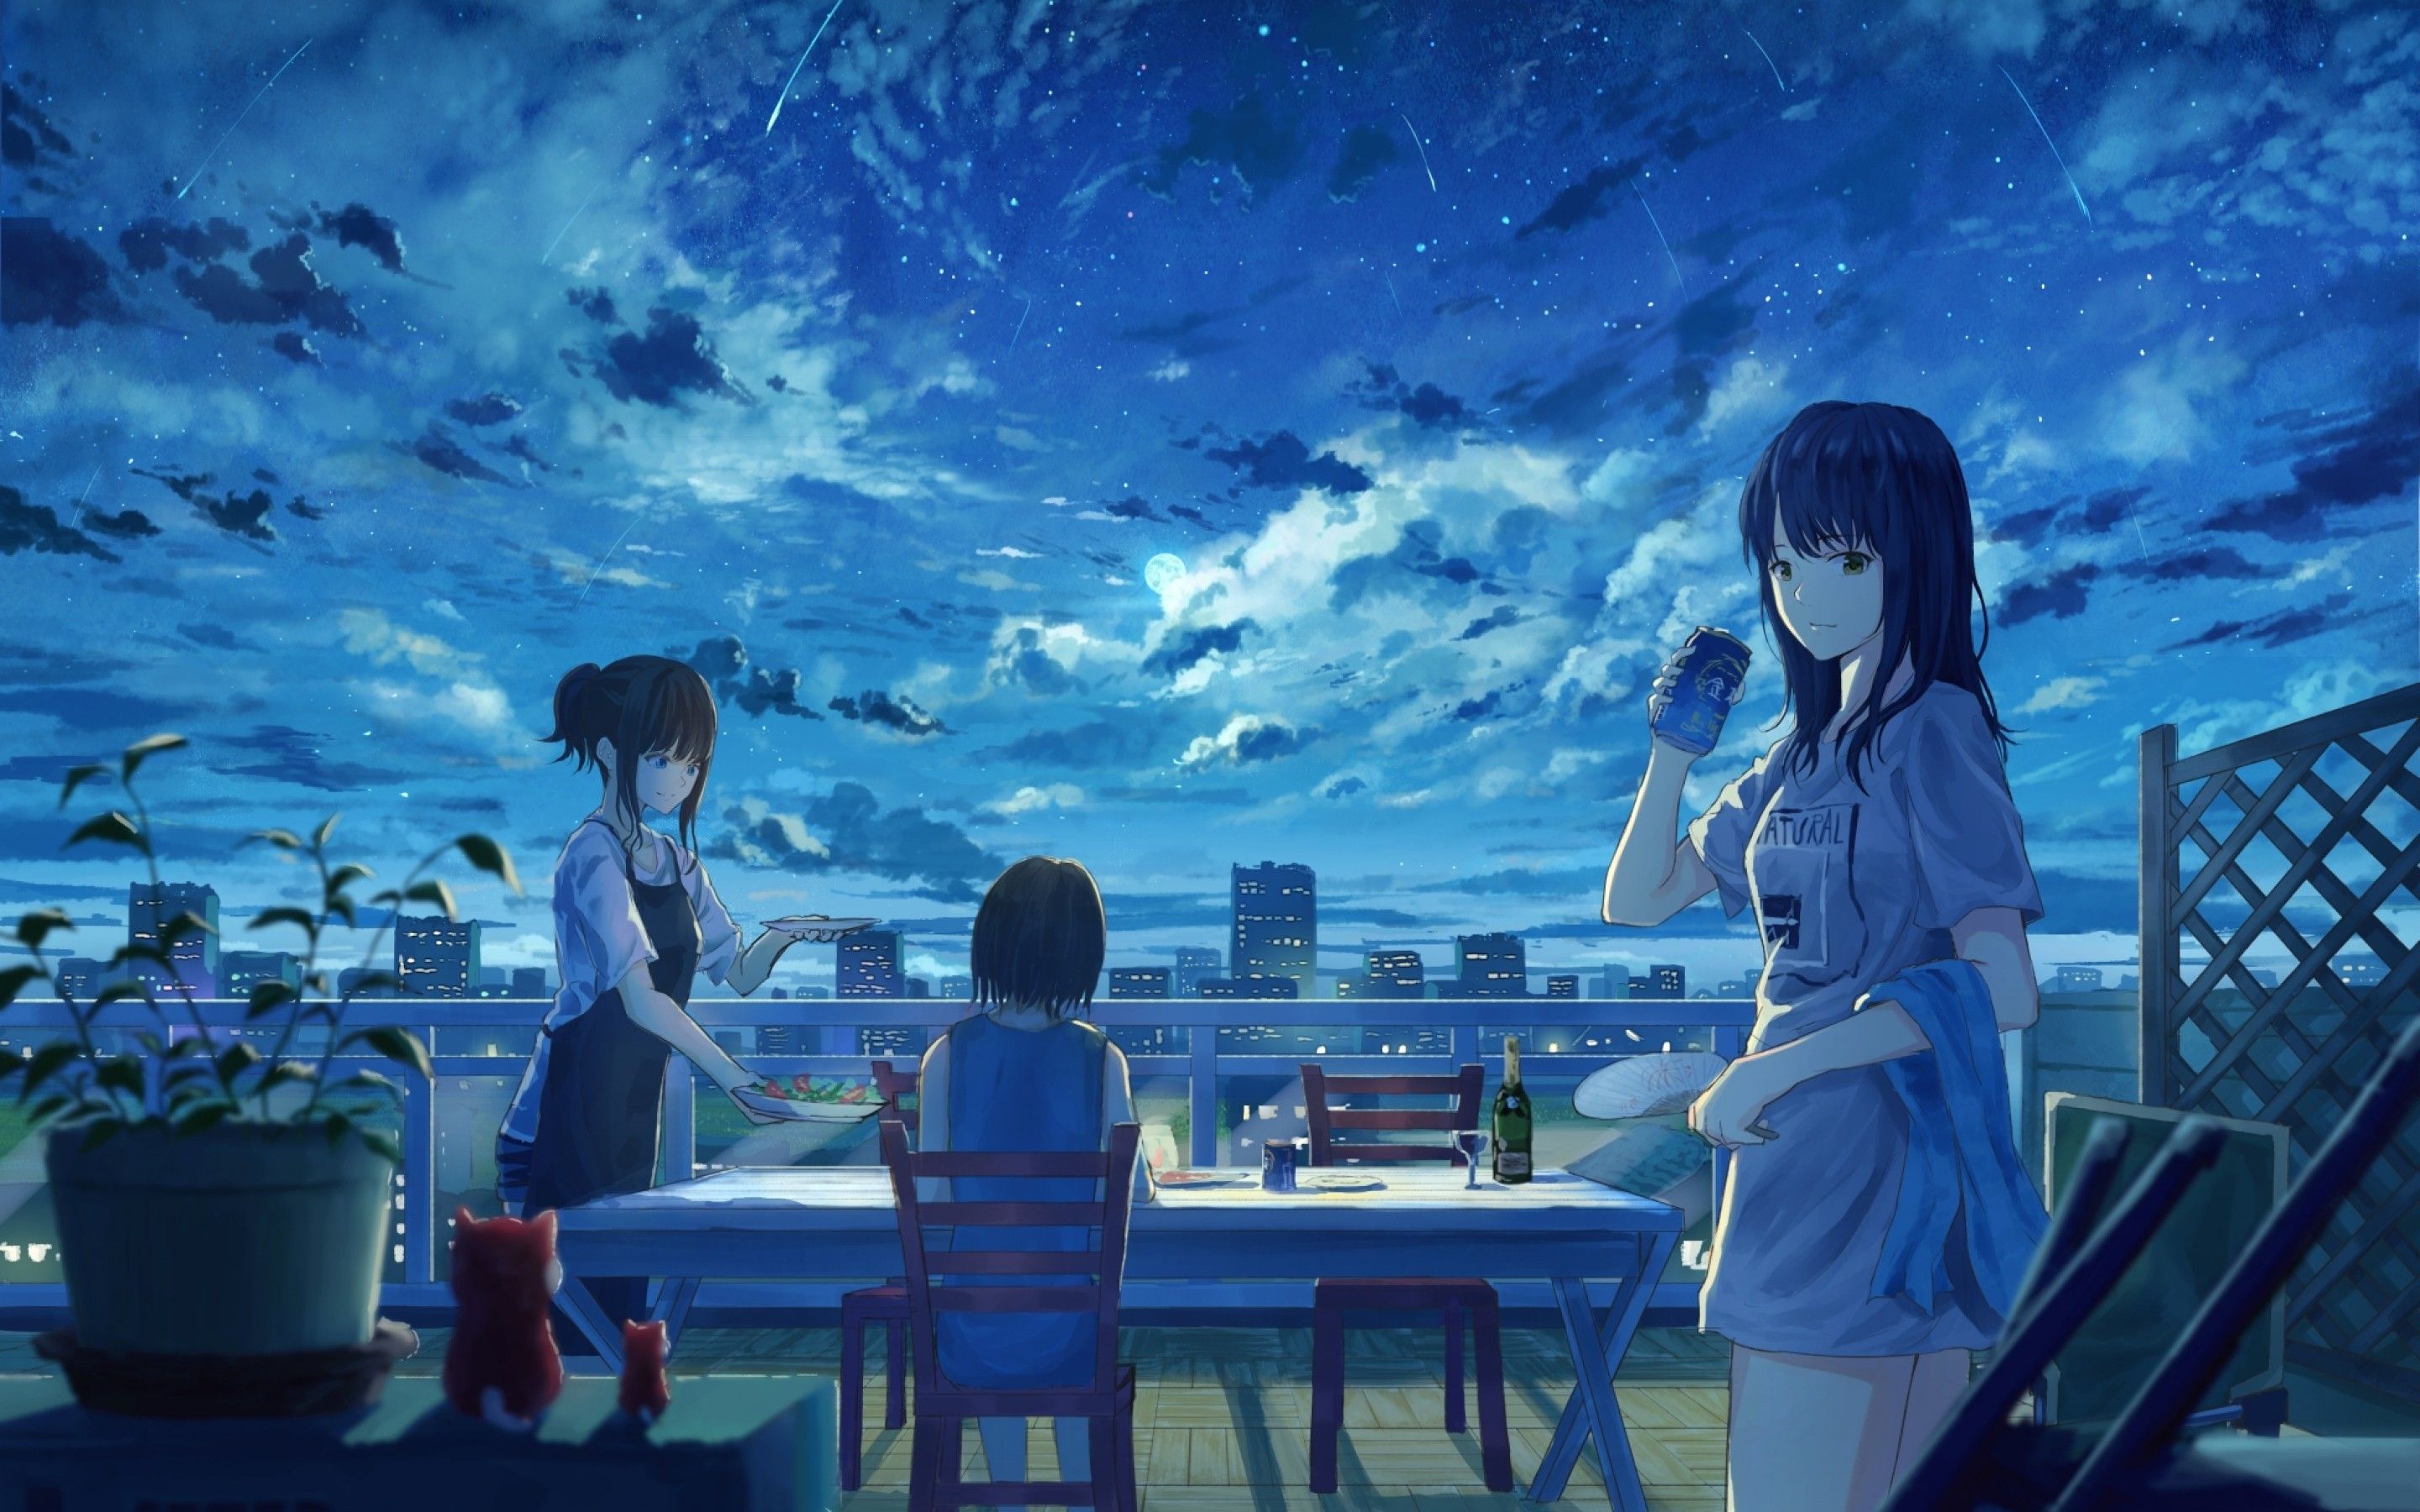 Download 2880x1800 Anime Girls, Night, Friends, Dinner, Clouds, Falling Stars Wallpaper for MacBook Pro 15 inch